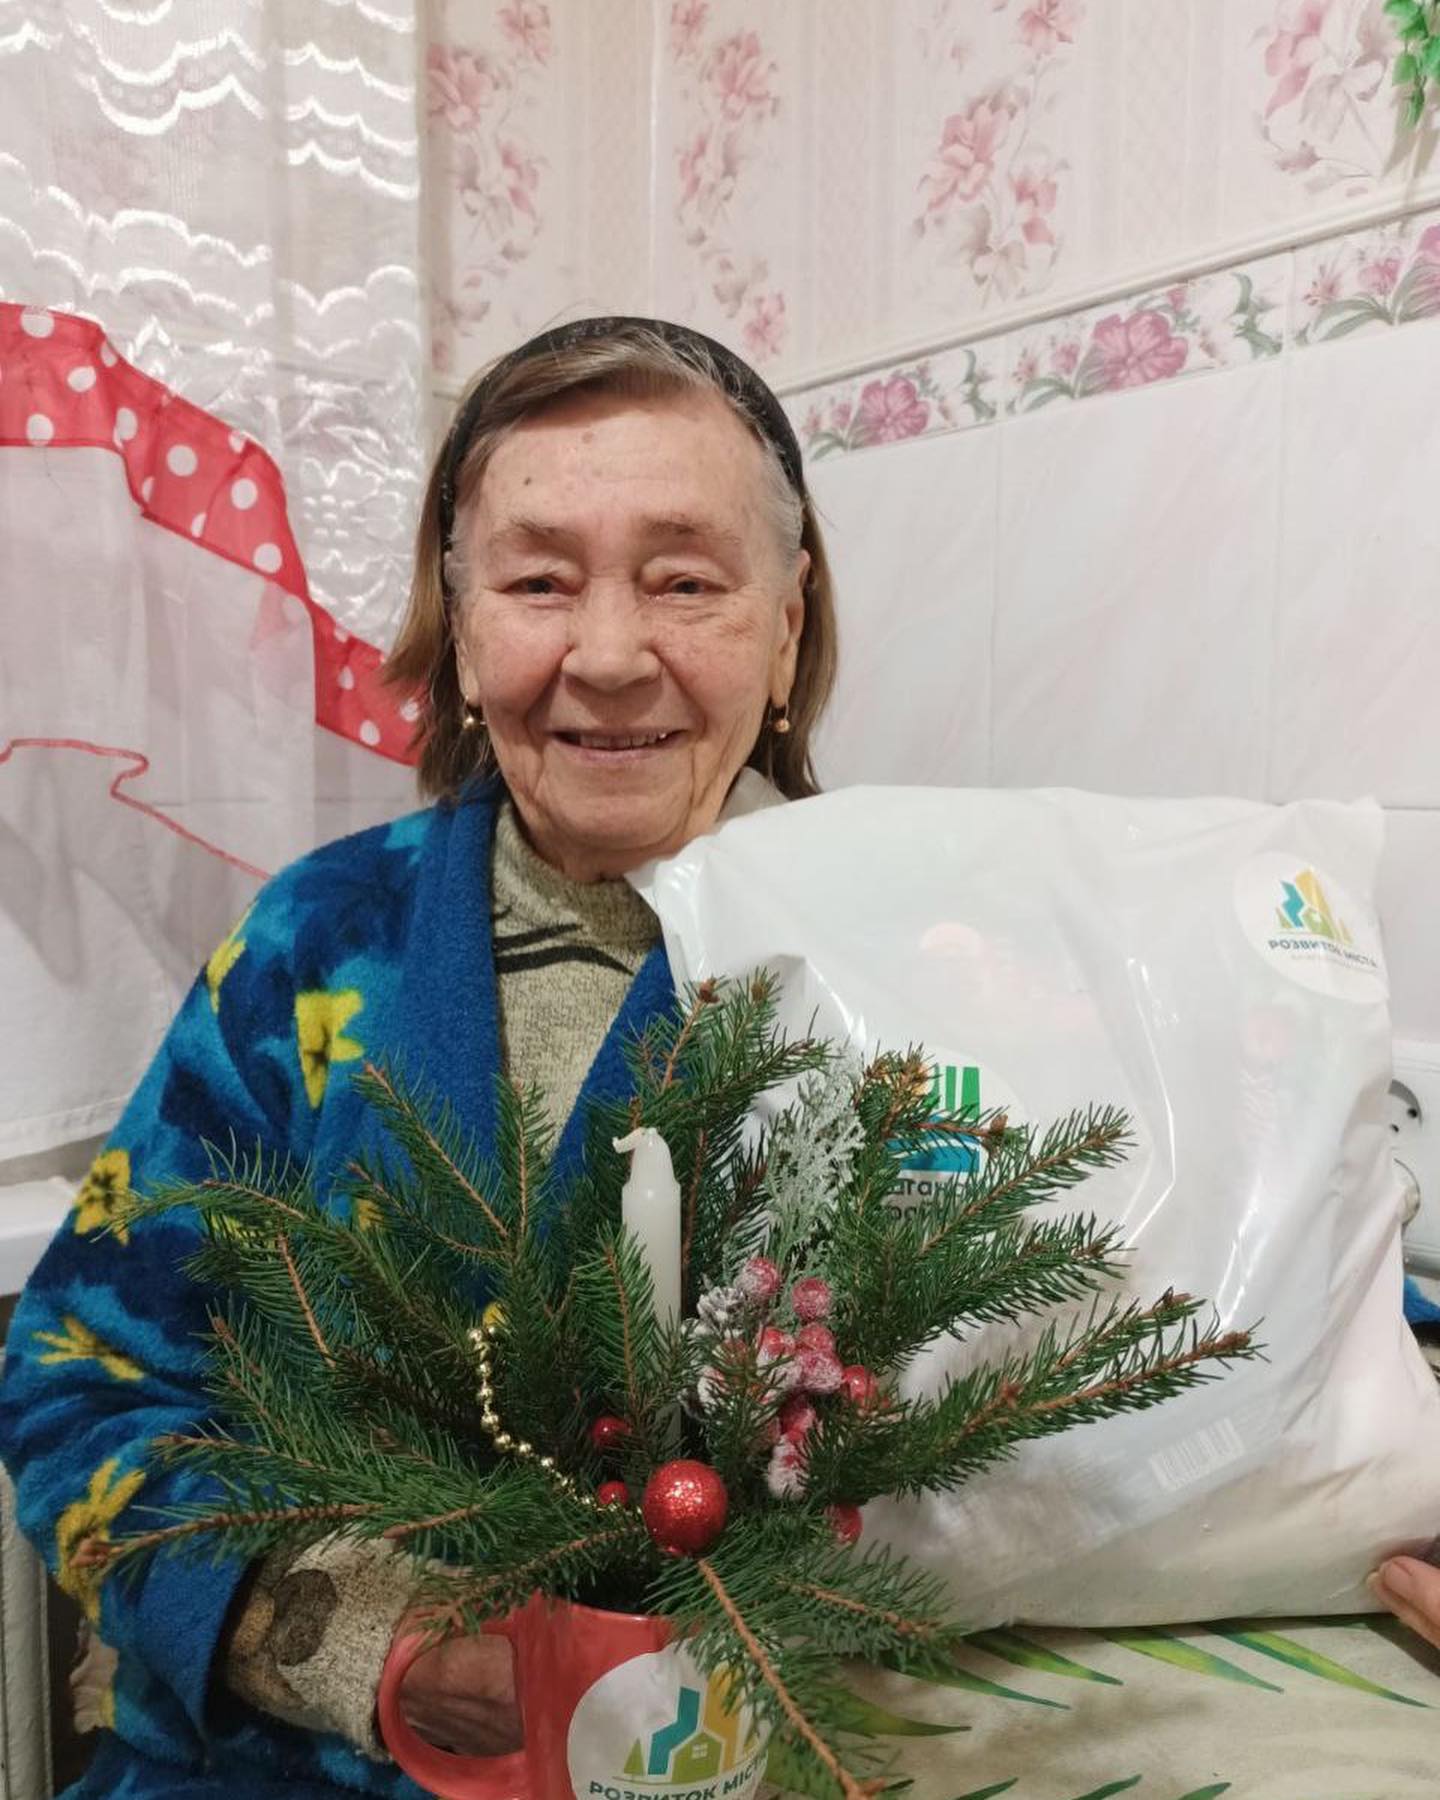 A woman holding a christmas tree and a bag.